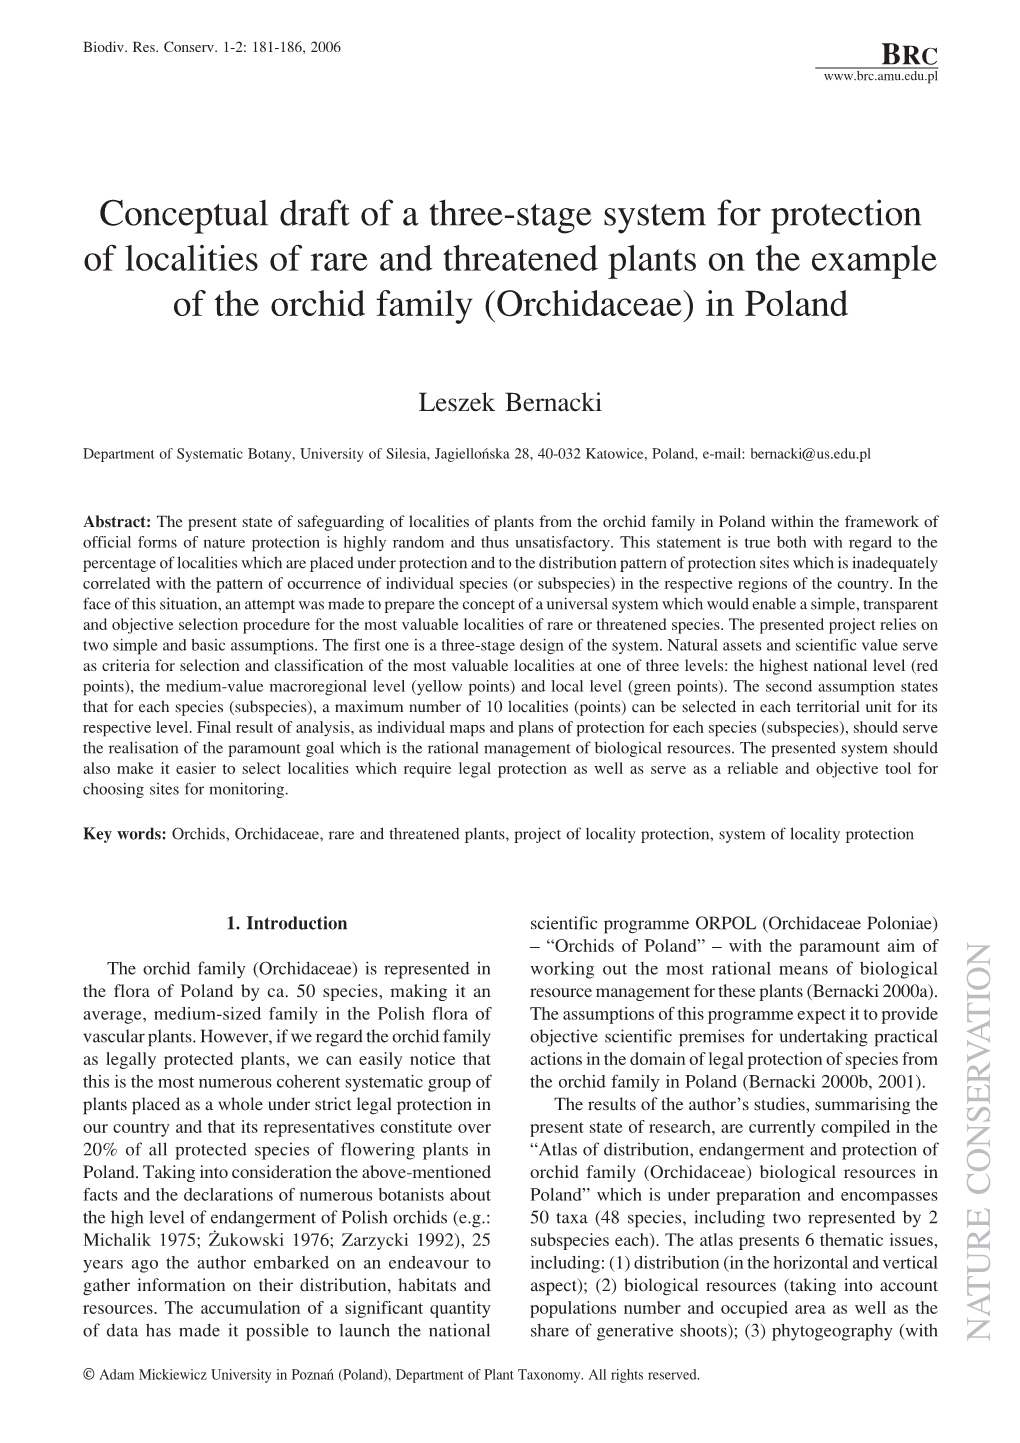 Conceptual Draft of a Three-Stage System for Protection of Localities of Rare and Threatened Plants on the Example of the Orchid Family (Orchidaceae) in Poland